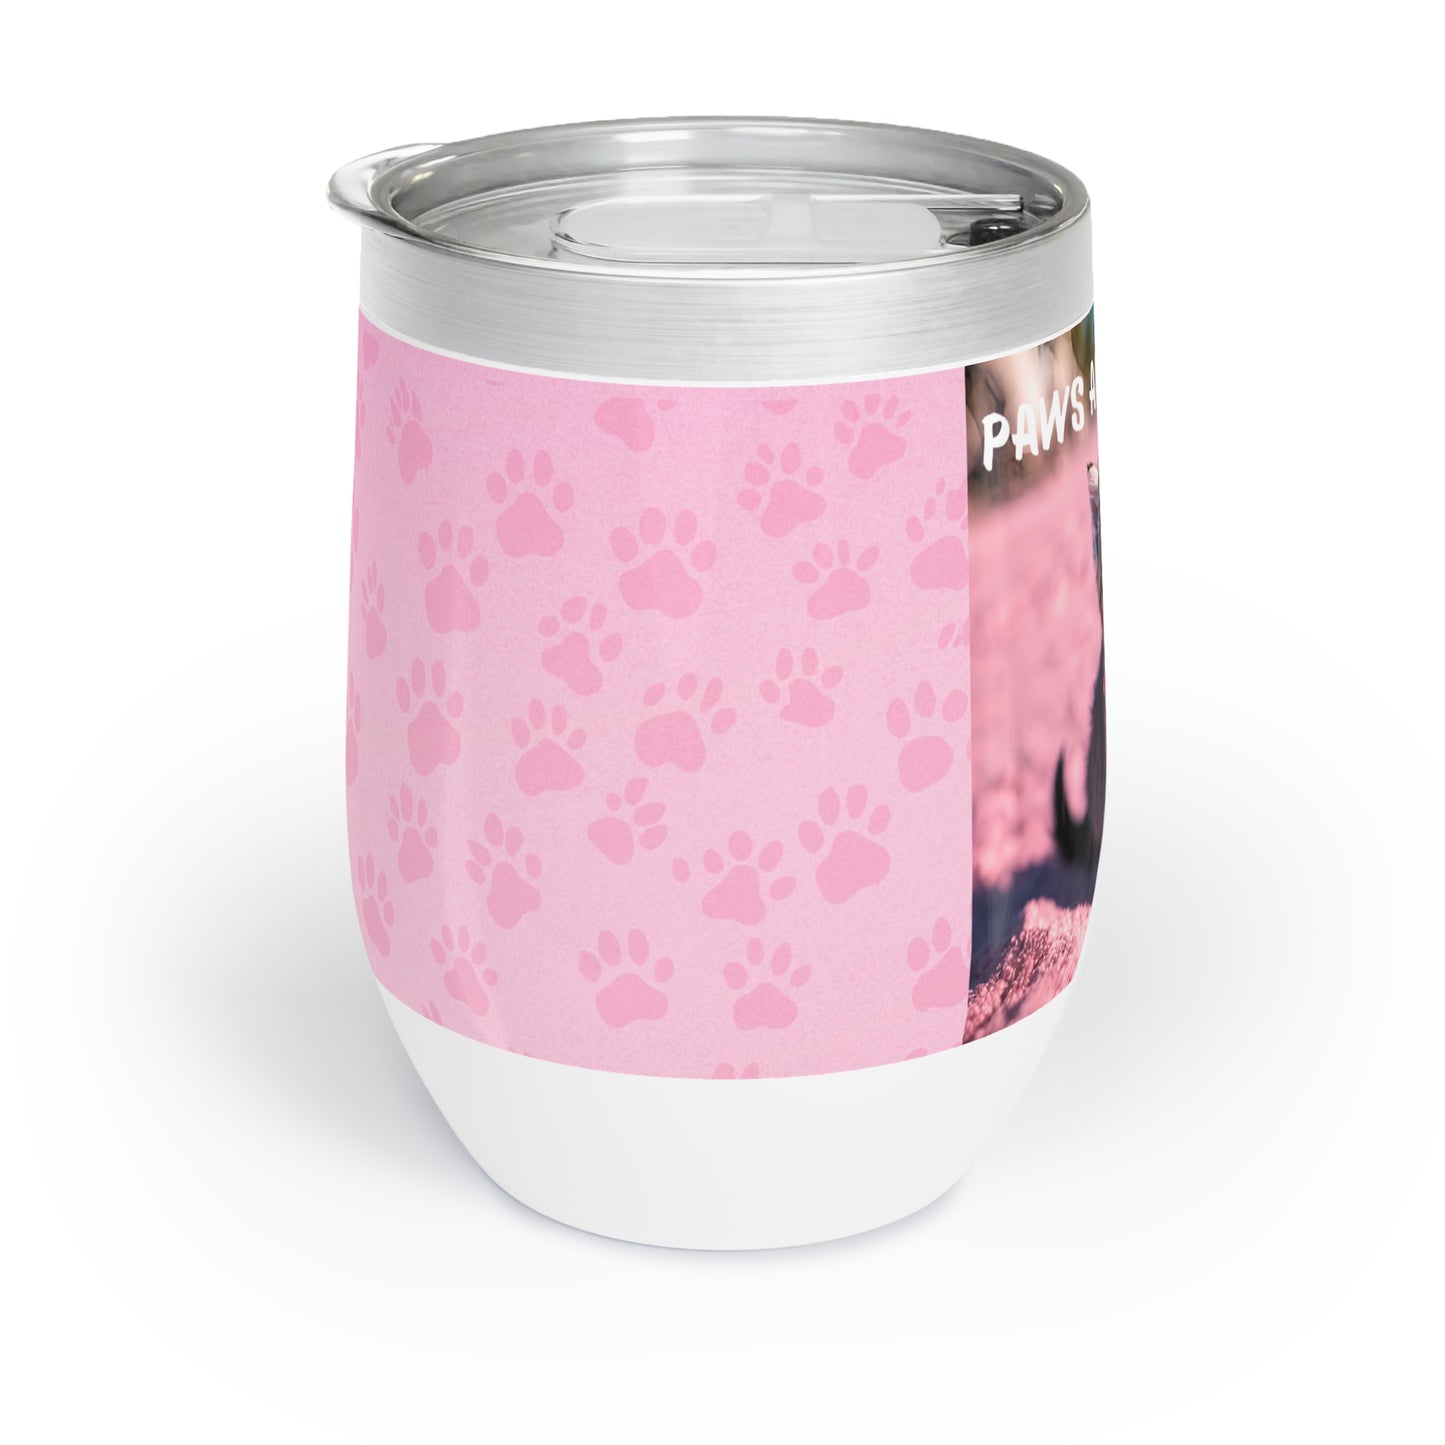 Cute kitten wine tumbler for vacation, side view.